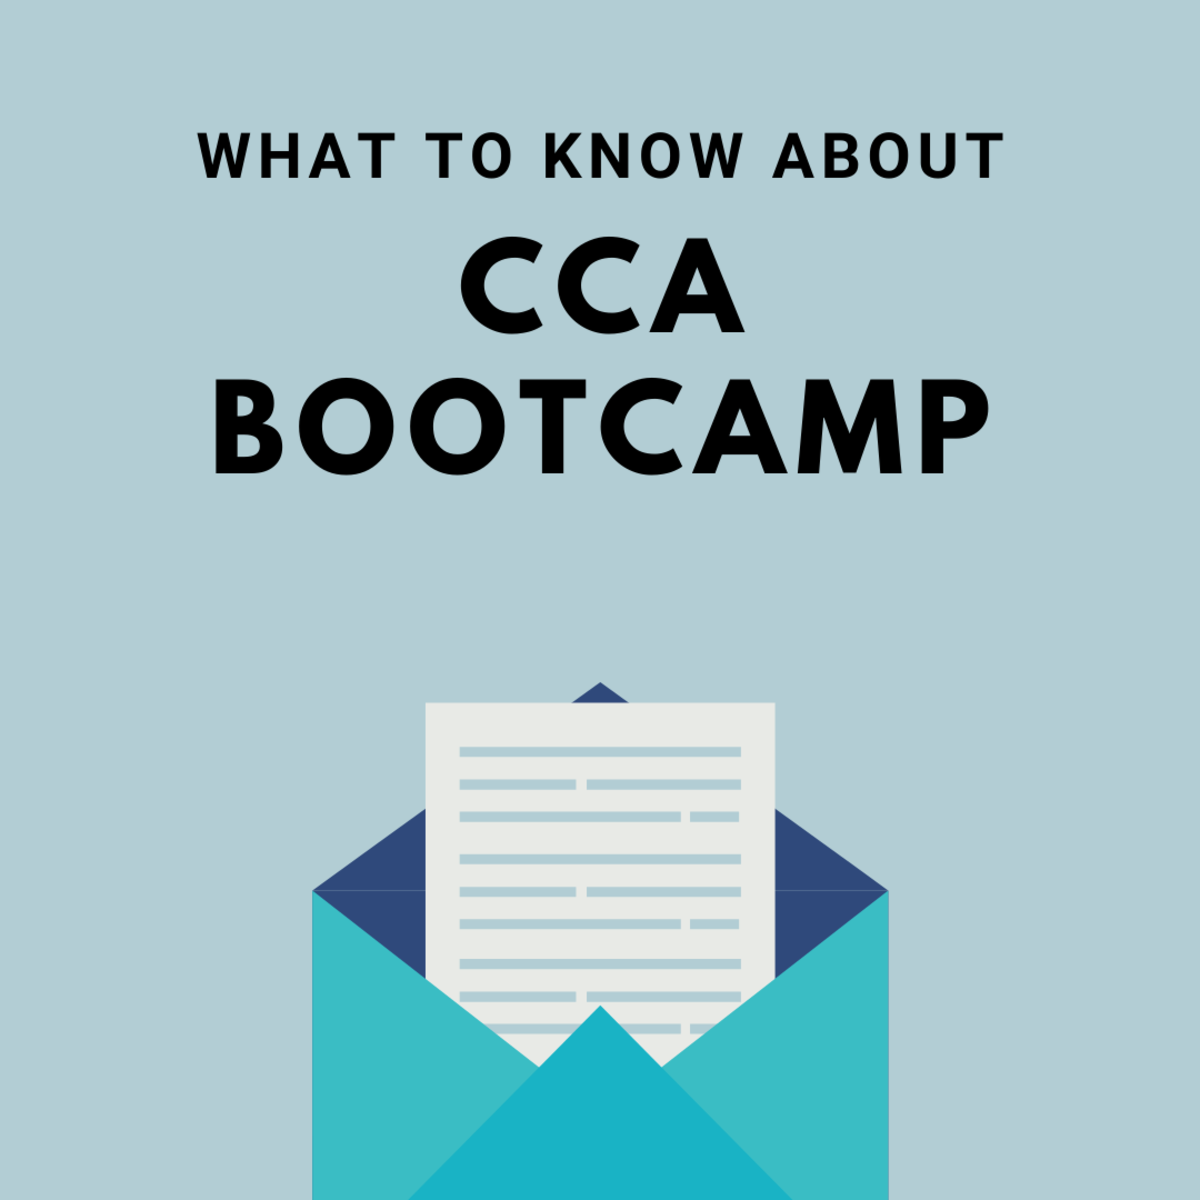 CCA Bootcamp – What to Expect During Your Brief but Brutal Letter Carrier Initiation